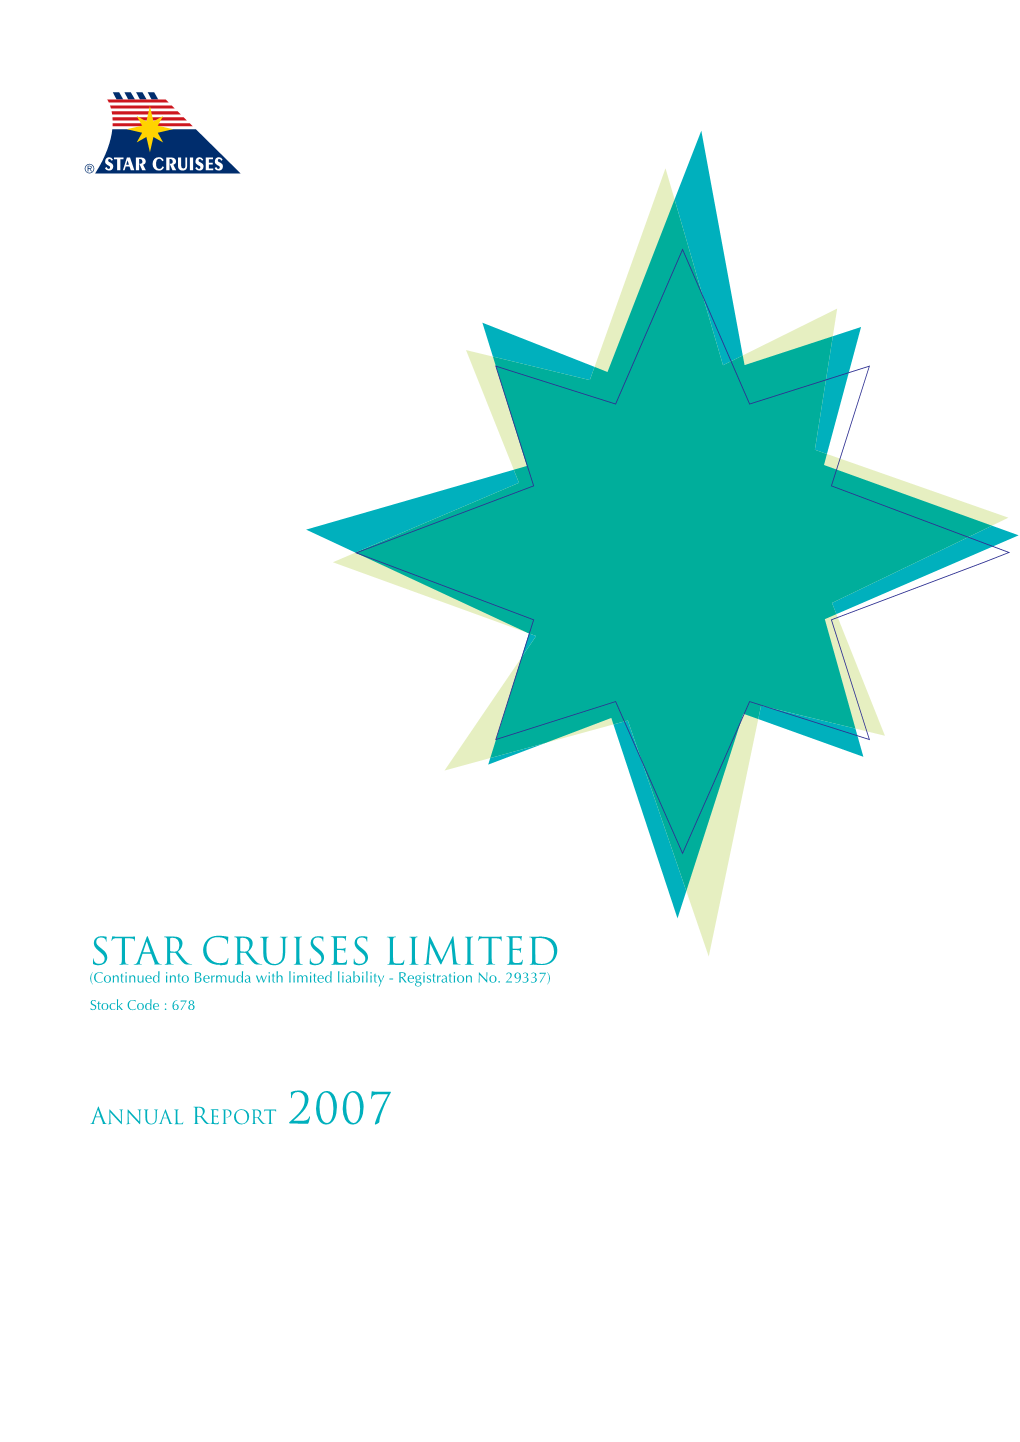 Star Cruises Limited